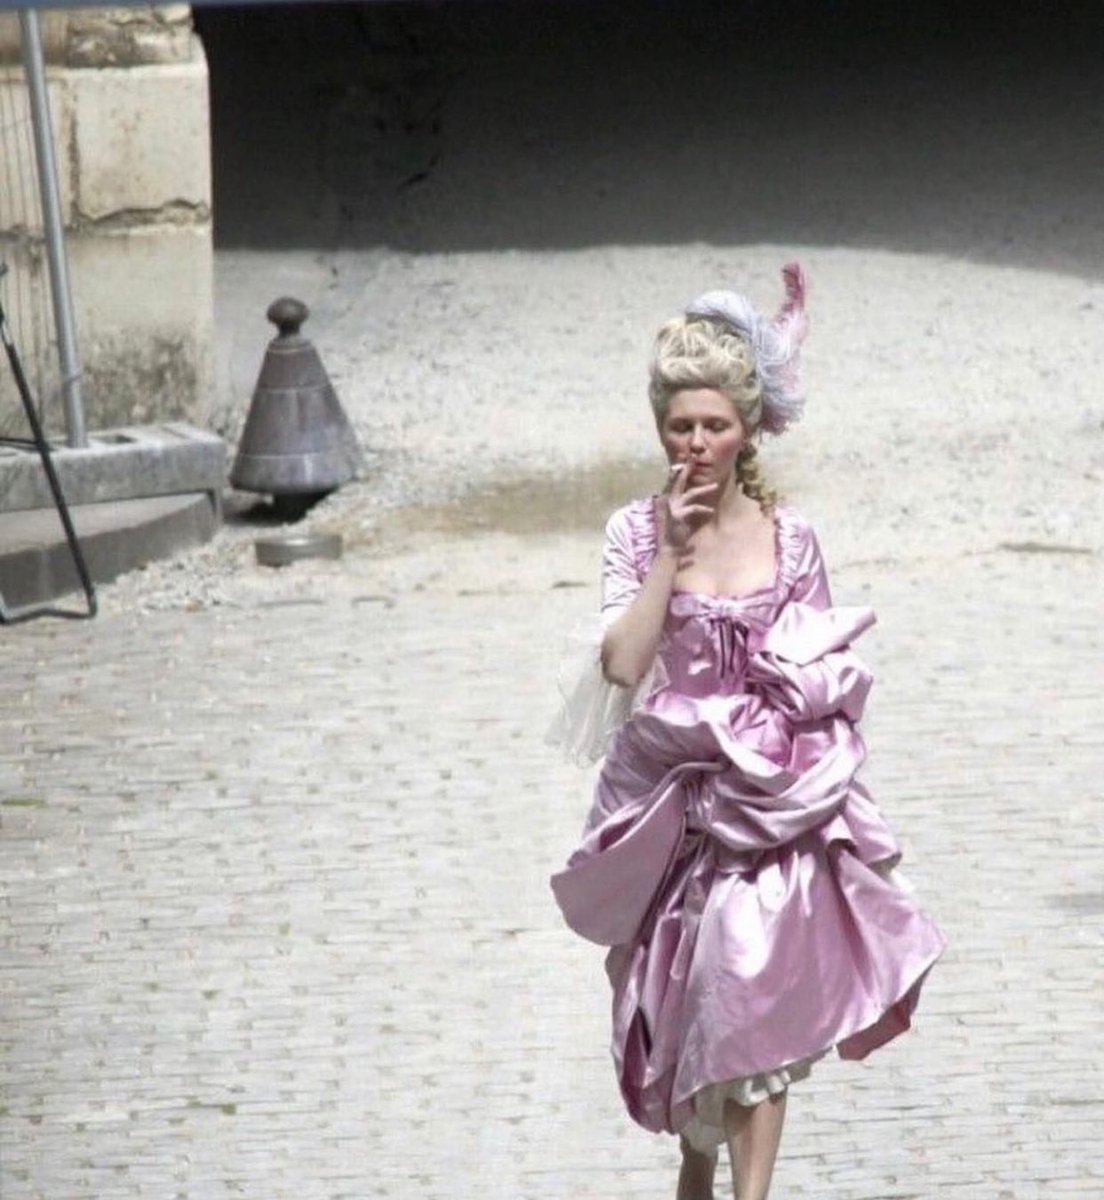 10 behind-the-scenes pictures from movie sets: 1) kirsten dunst smoking on the set of 'marie antoinette'